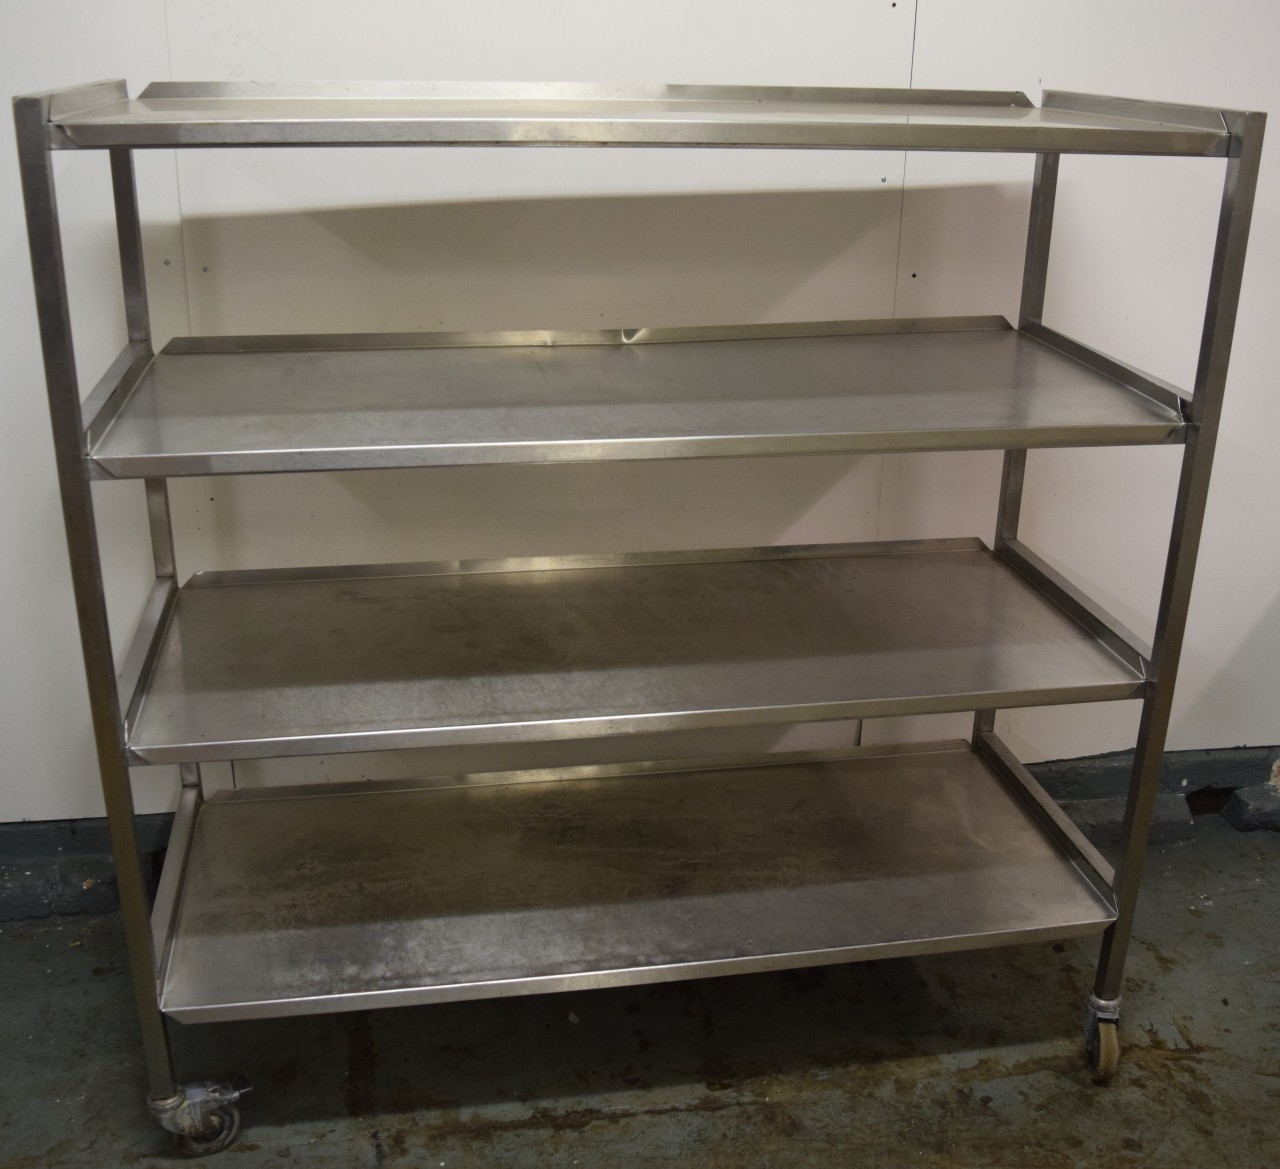 4 Tier Stainless Steel Strager Rack with Wheels. - CaterQuip Stainless Steel Shelving On Wheels